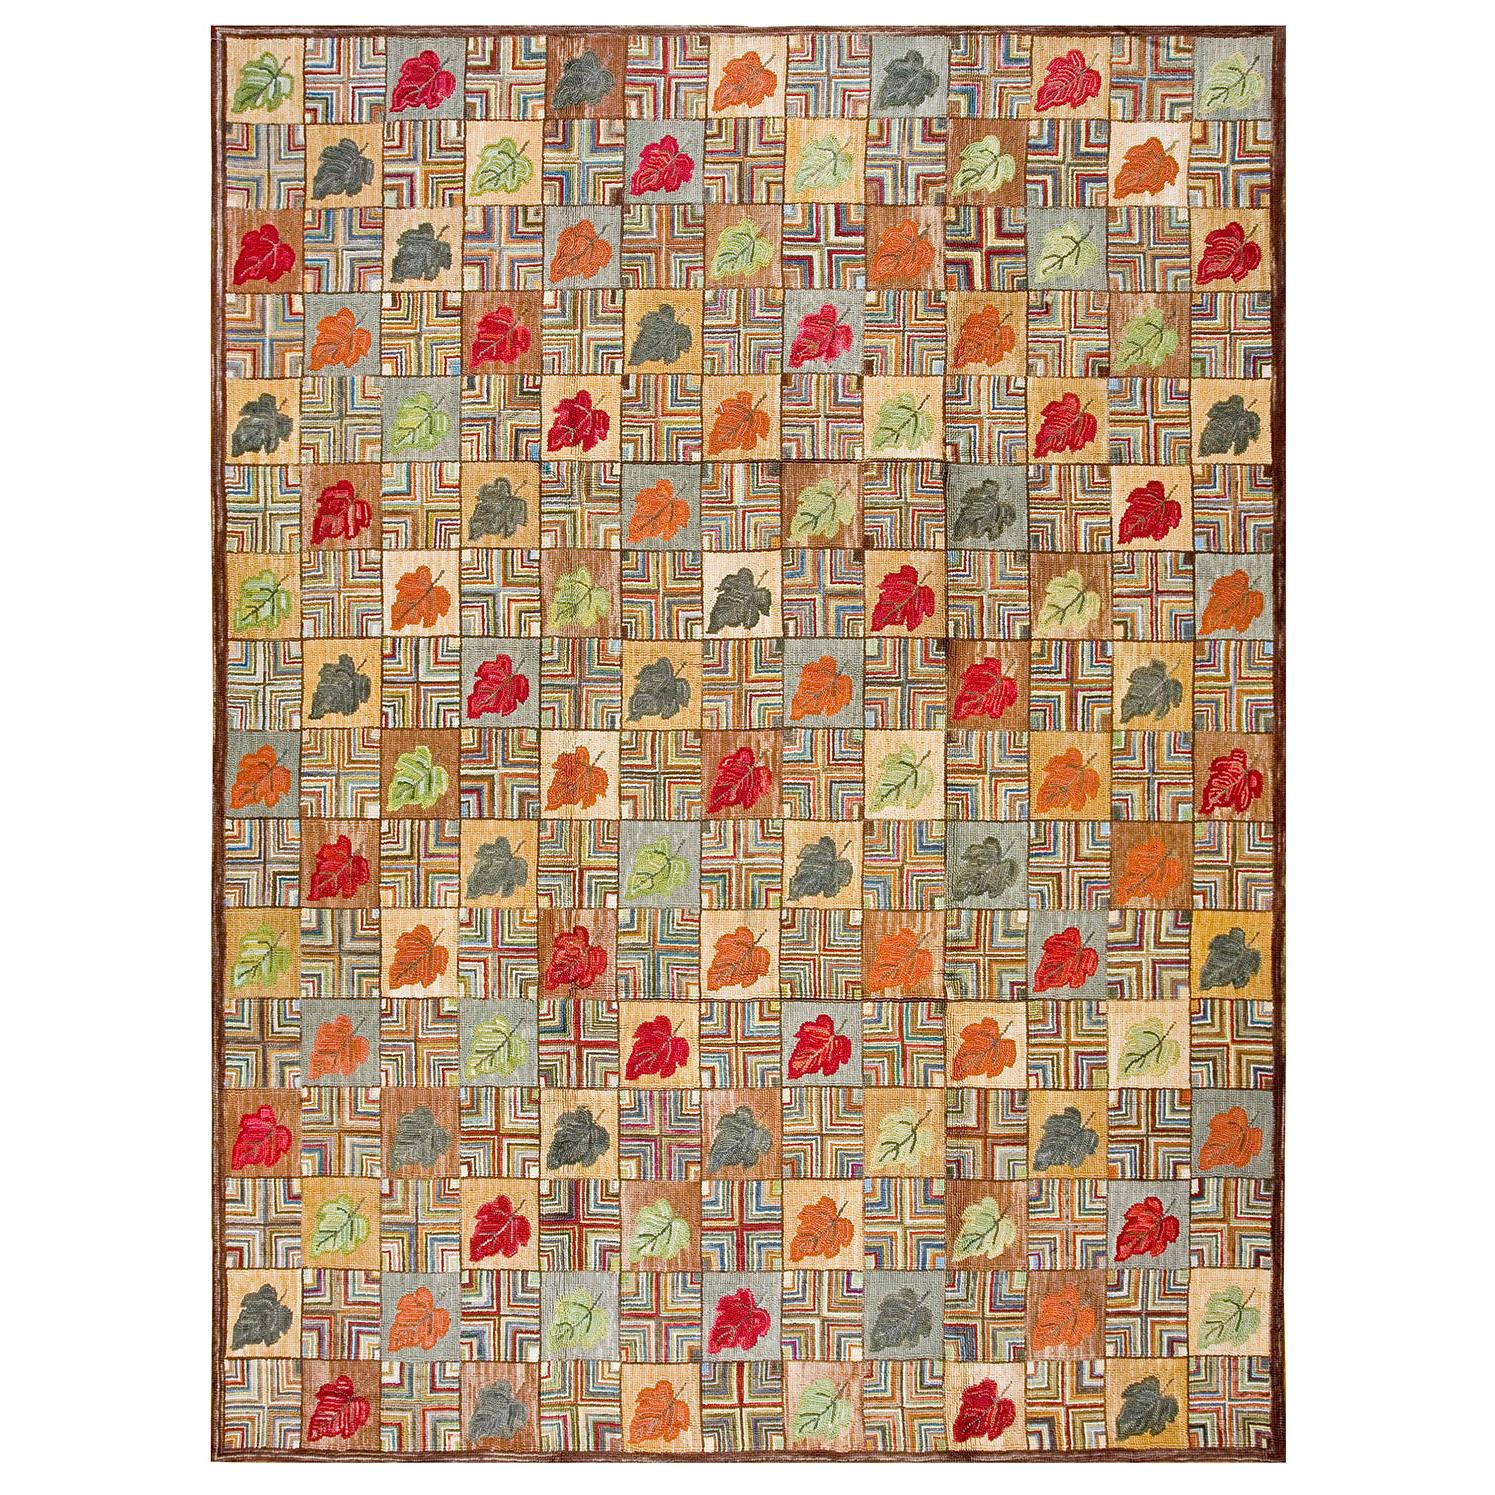 Contemporary American Hooked Rug (6' x 9' - 182 x 274) For Sale